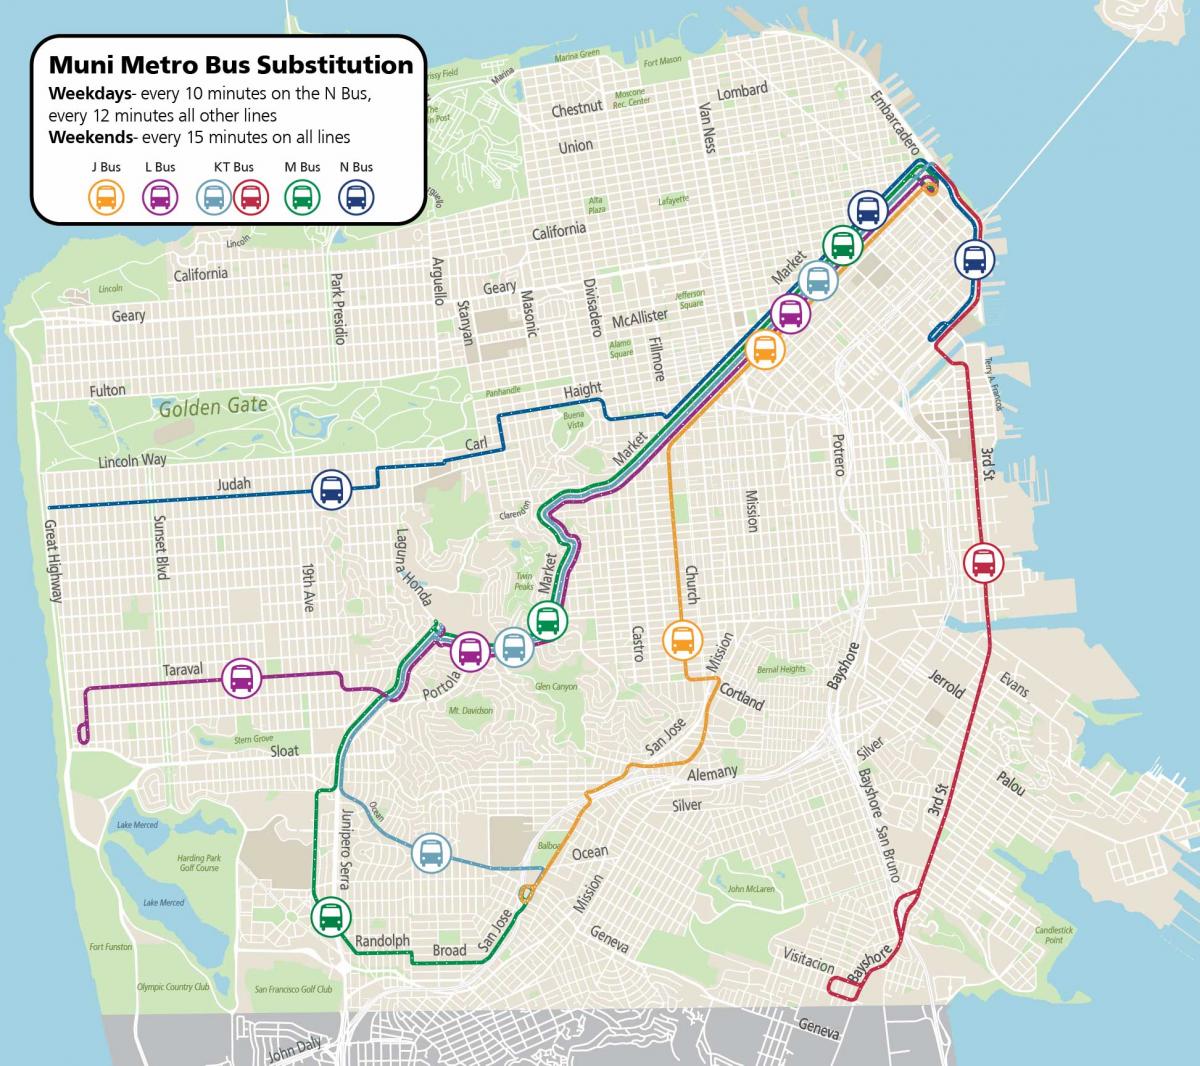 Map showing bus shuttle substitutions for all Muni Metro routes. Muni Metro Bus Substitution. Weekdays - every 10 minutes on the N Bus, every 12 minutes all other lines. Weekends - every 15 minutes on all lines.